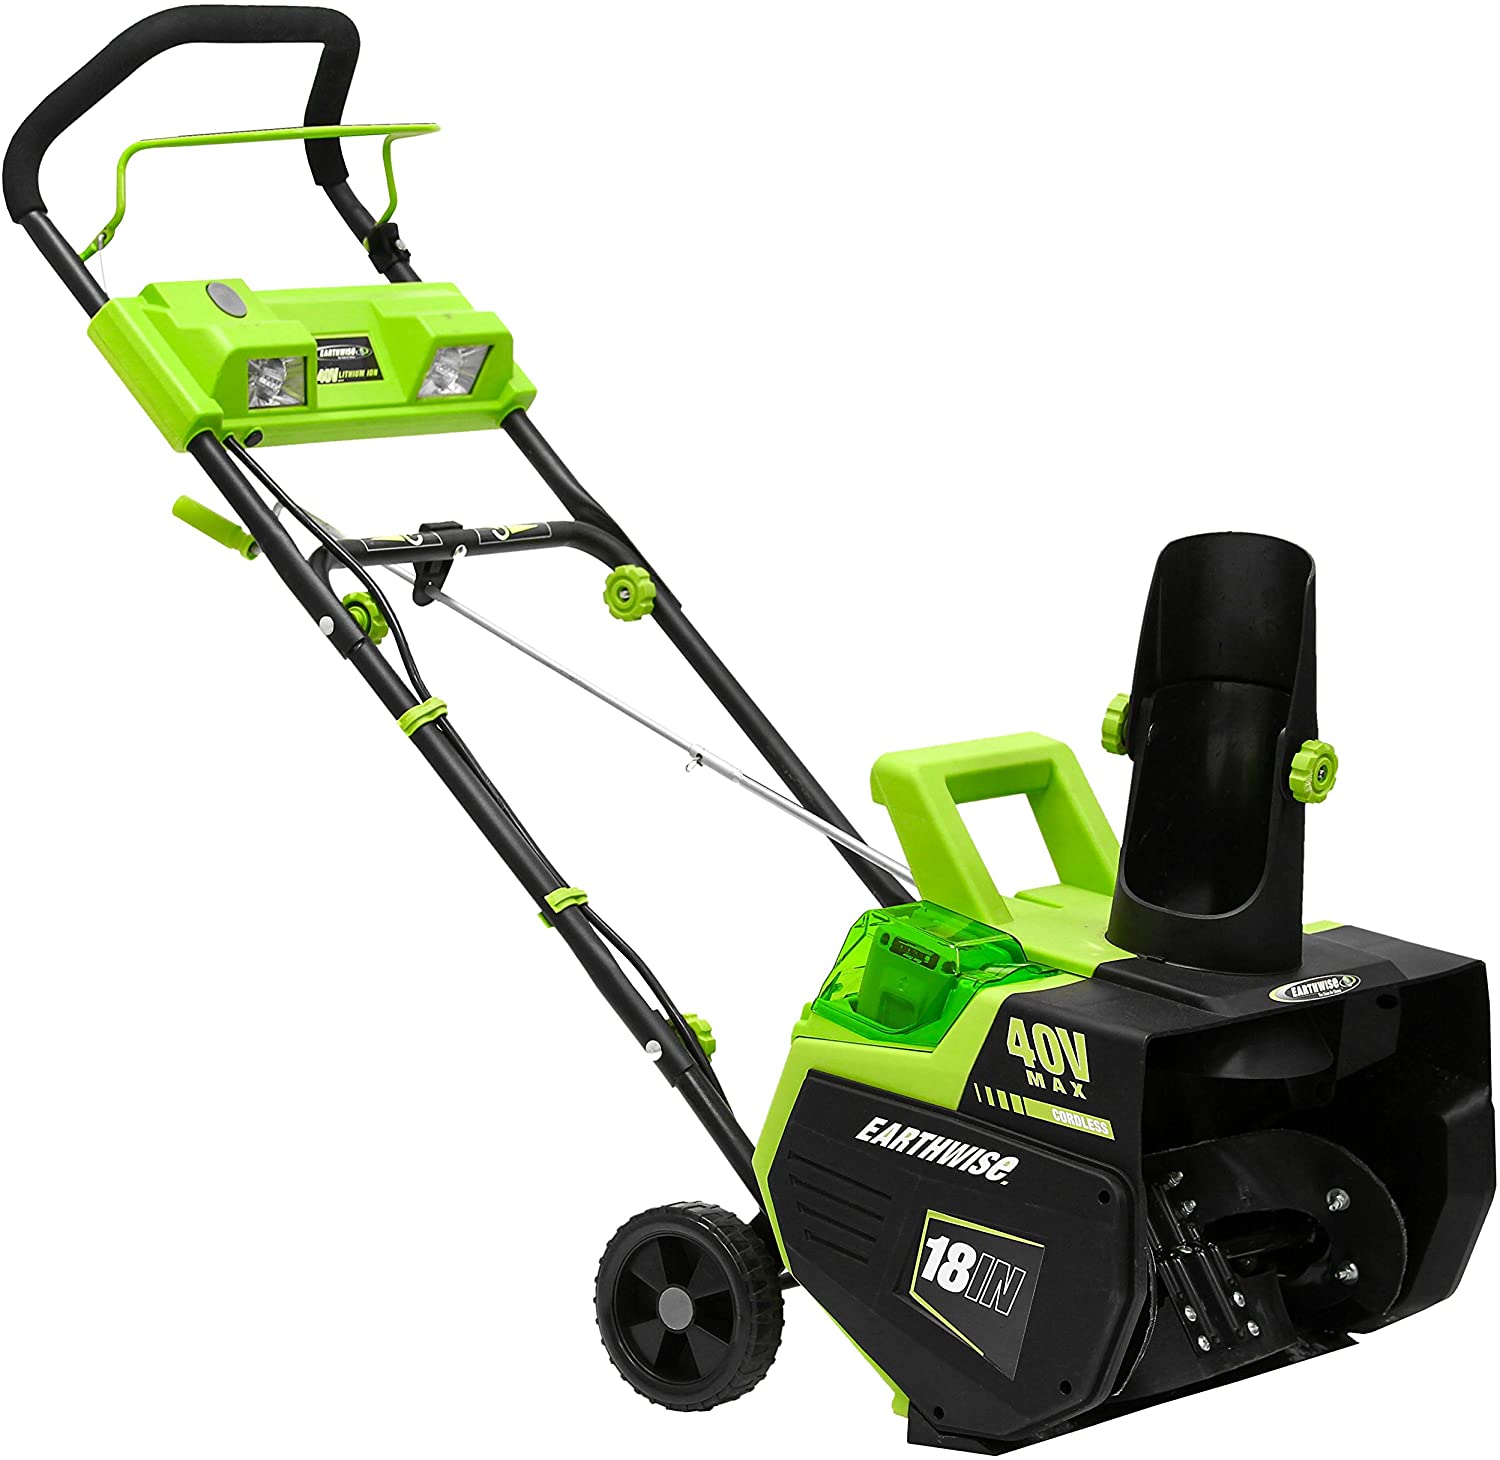 Earthwise SN74018 Cordless Electric 40-Volt 4Ah Brushless Motor, 18-Inch Snow Thrower